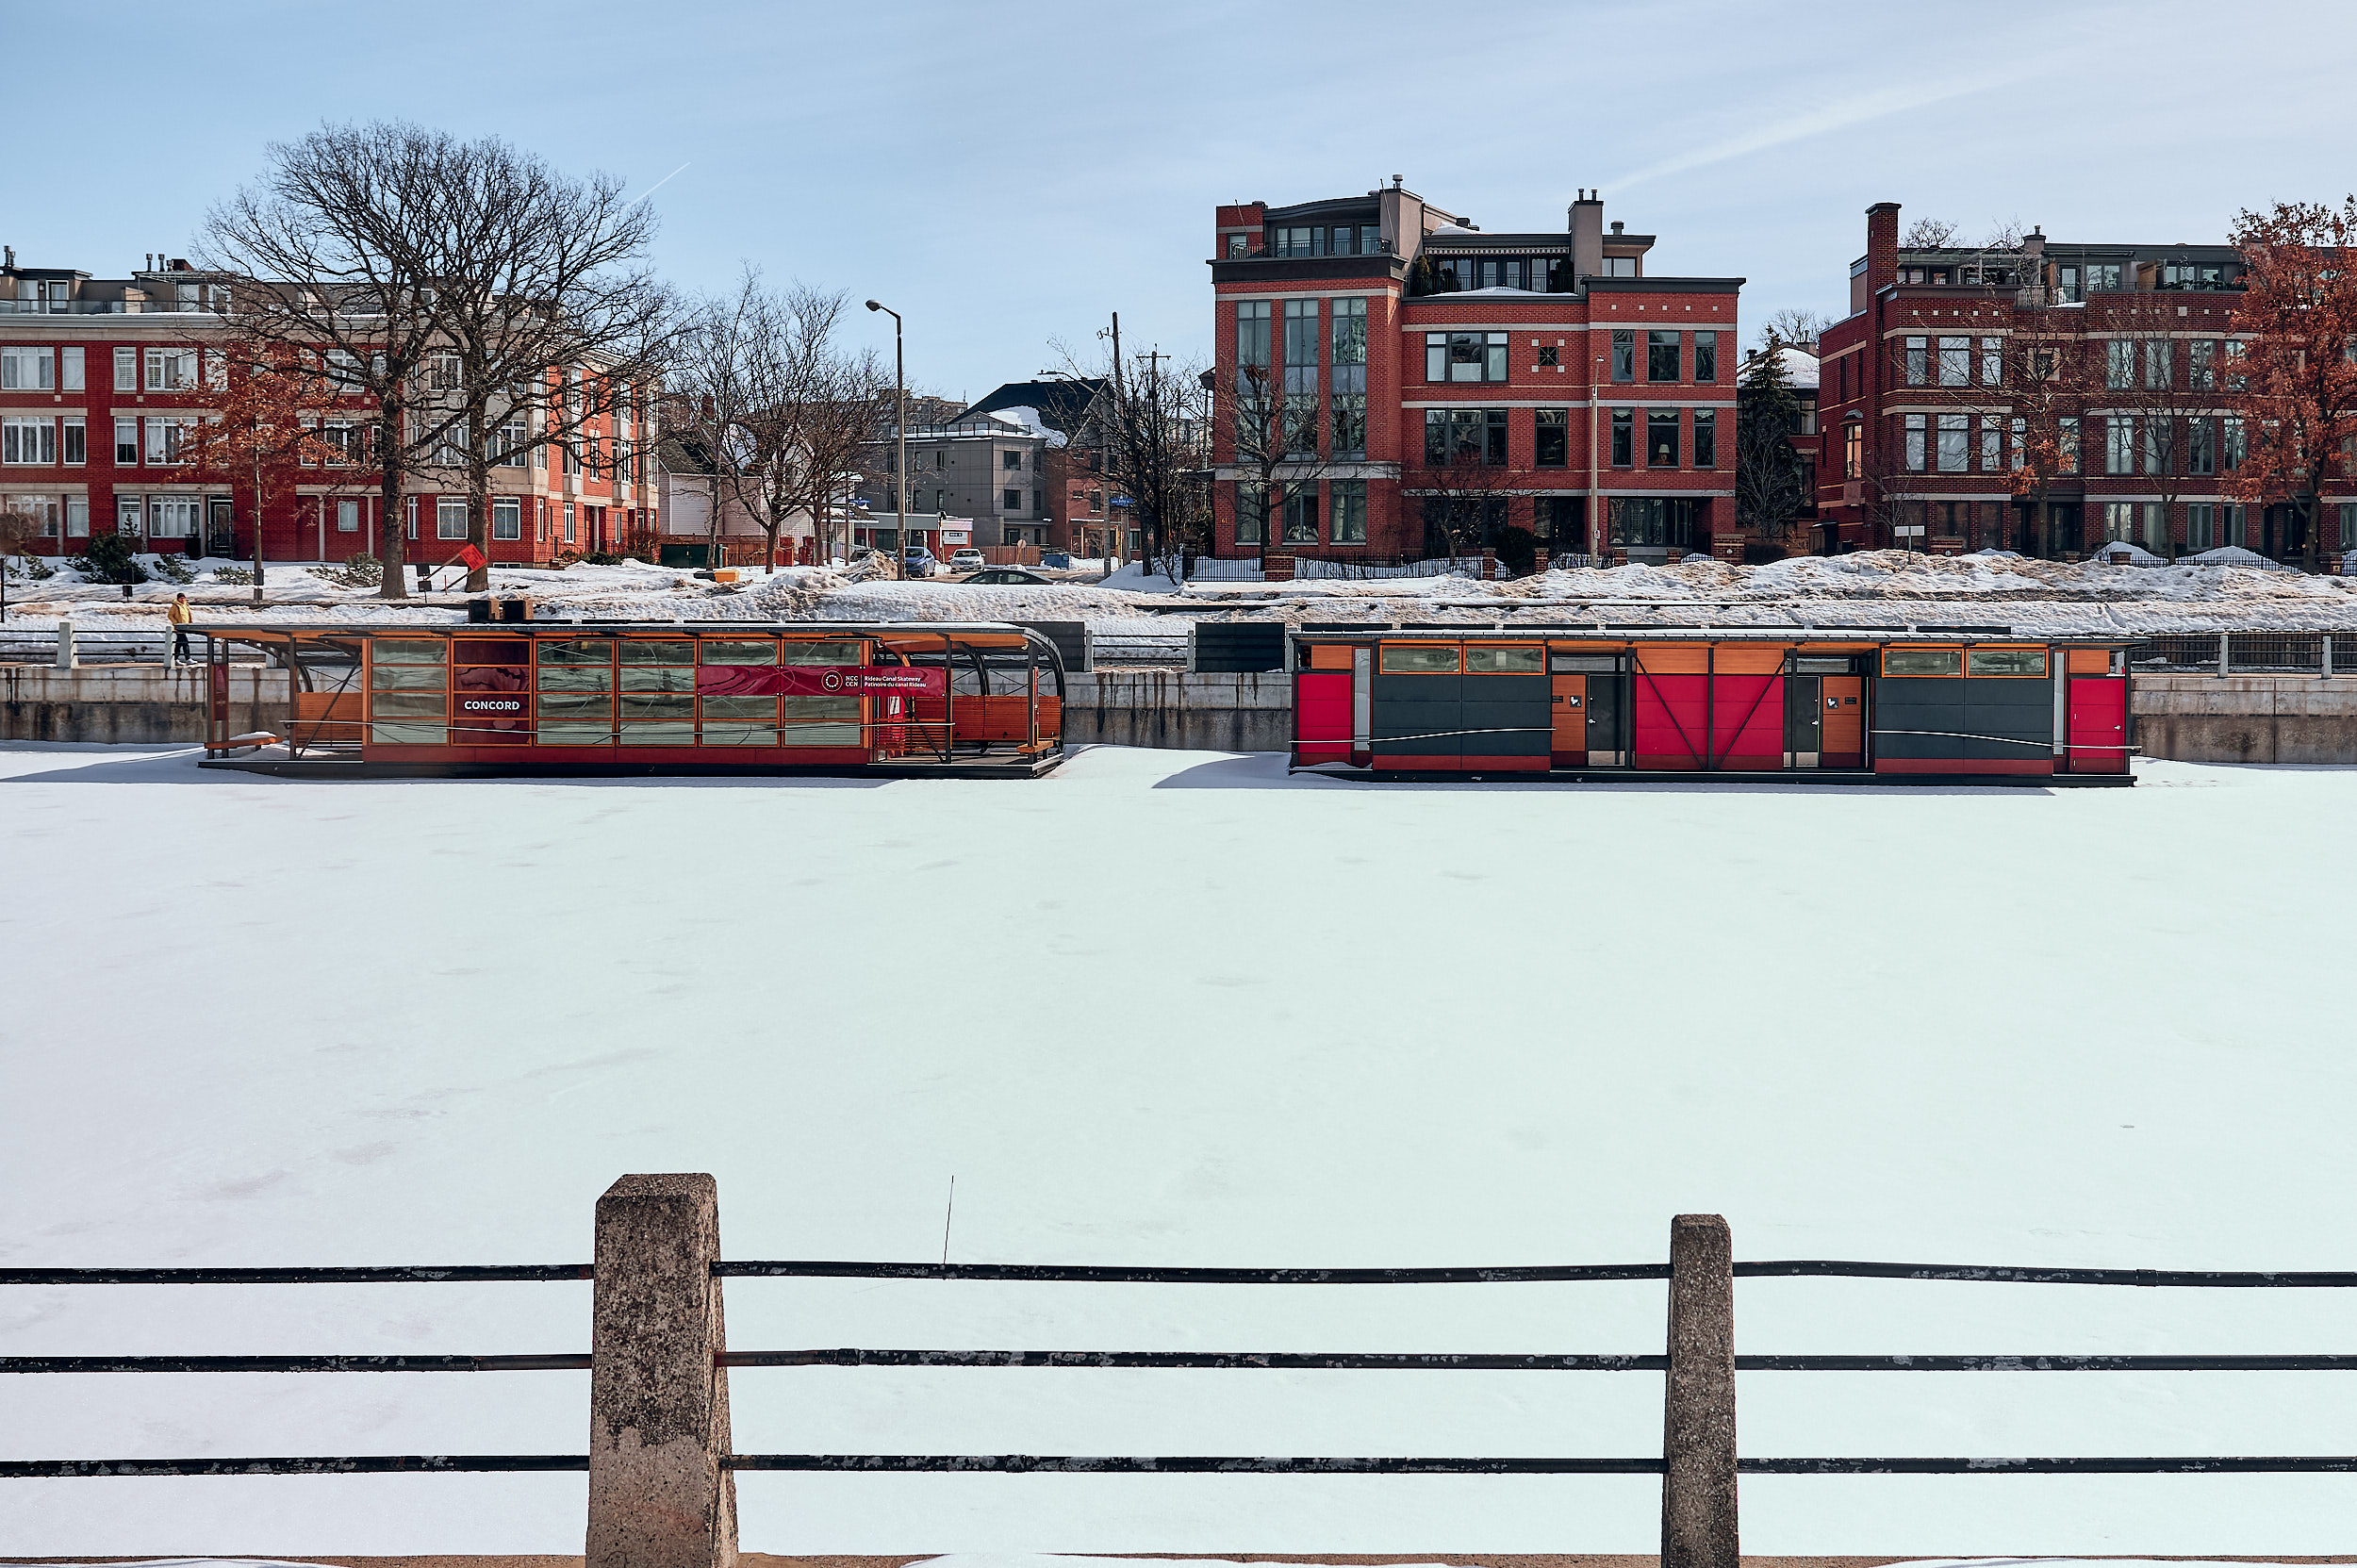 Unused skate huts that have been left on the Rideau Canal, which did not open for skating this winter.